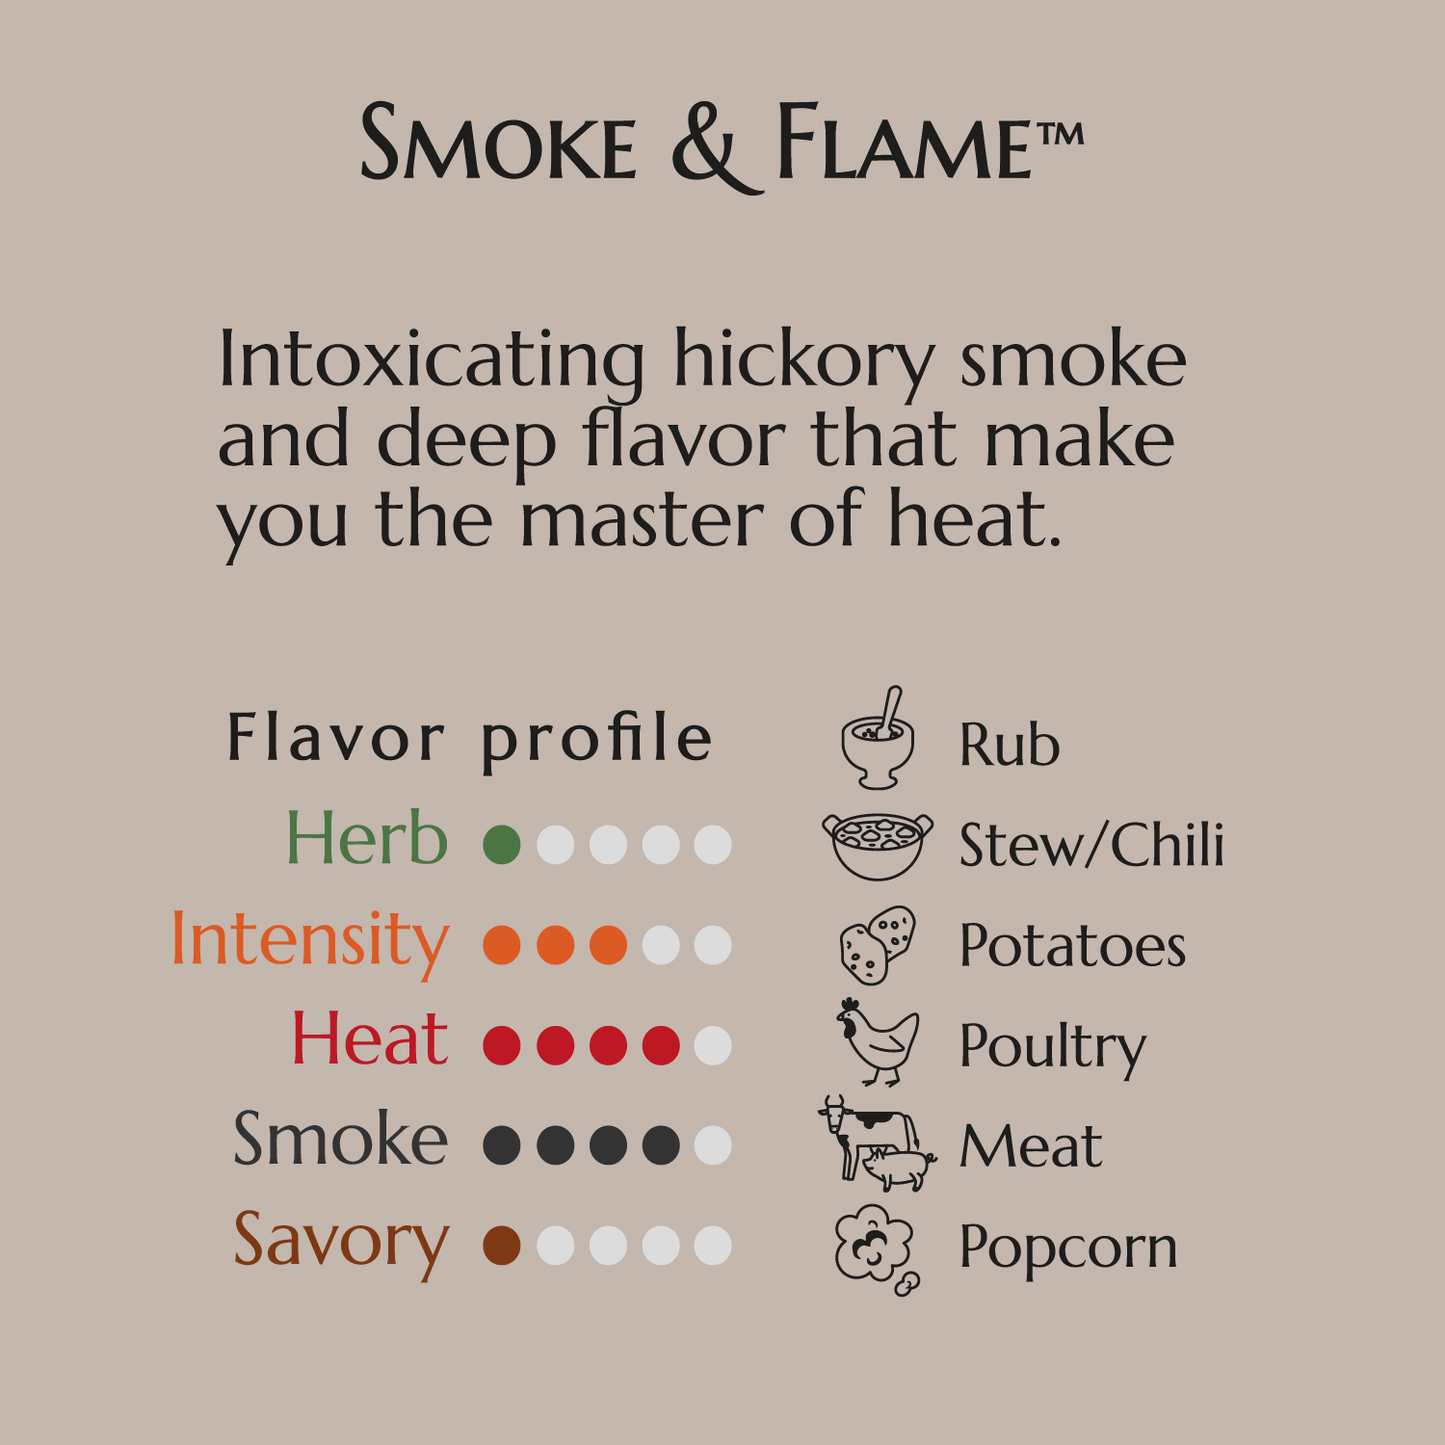 Hickory smoke, aleppo, pequin and chipotle peppers and herbs packs a powerful flavor experience. Low FODMAP, gluten free.